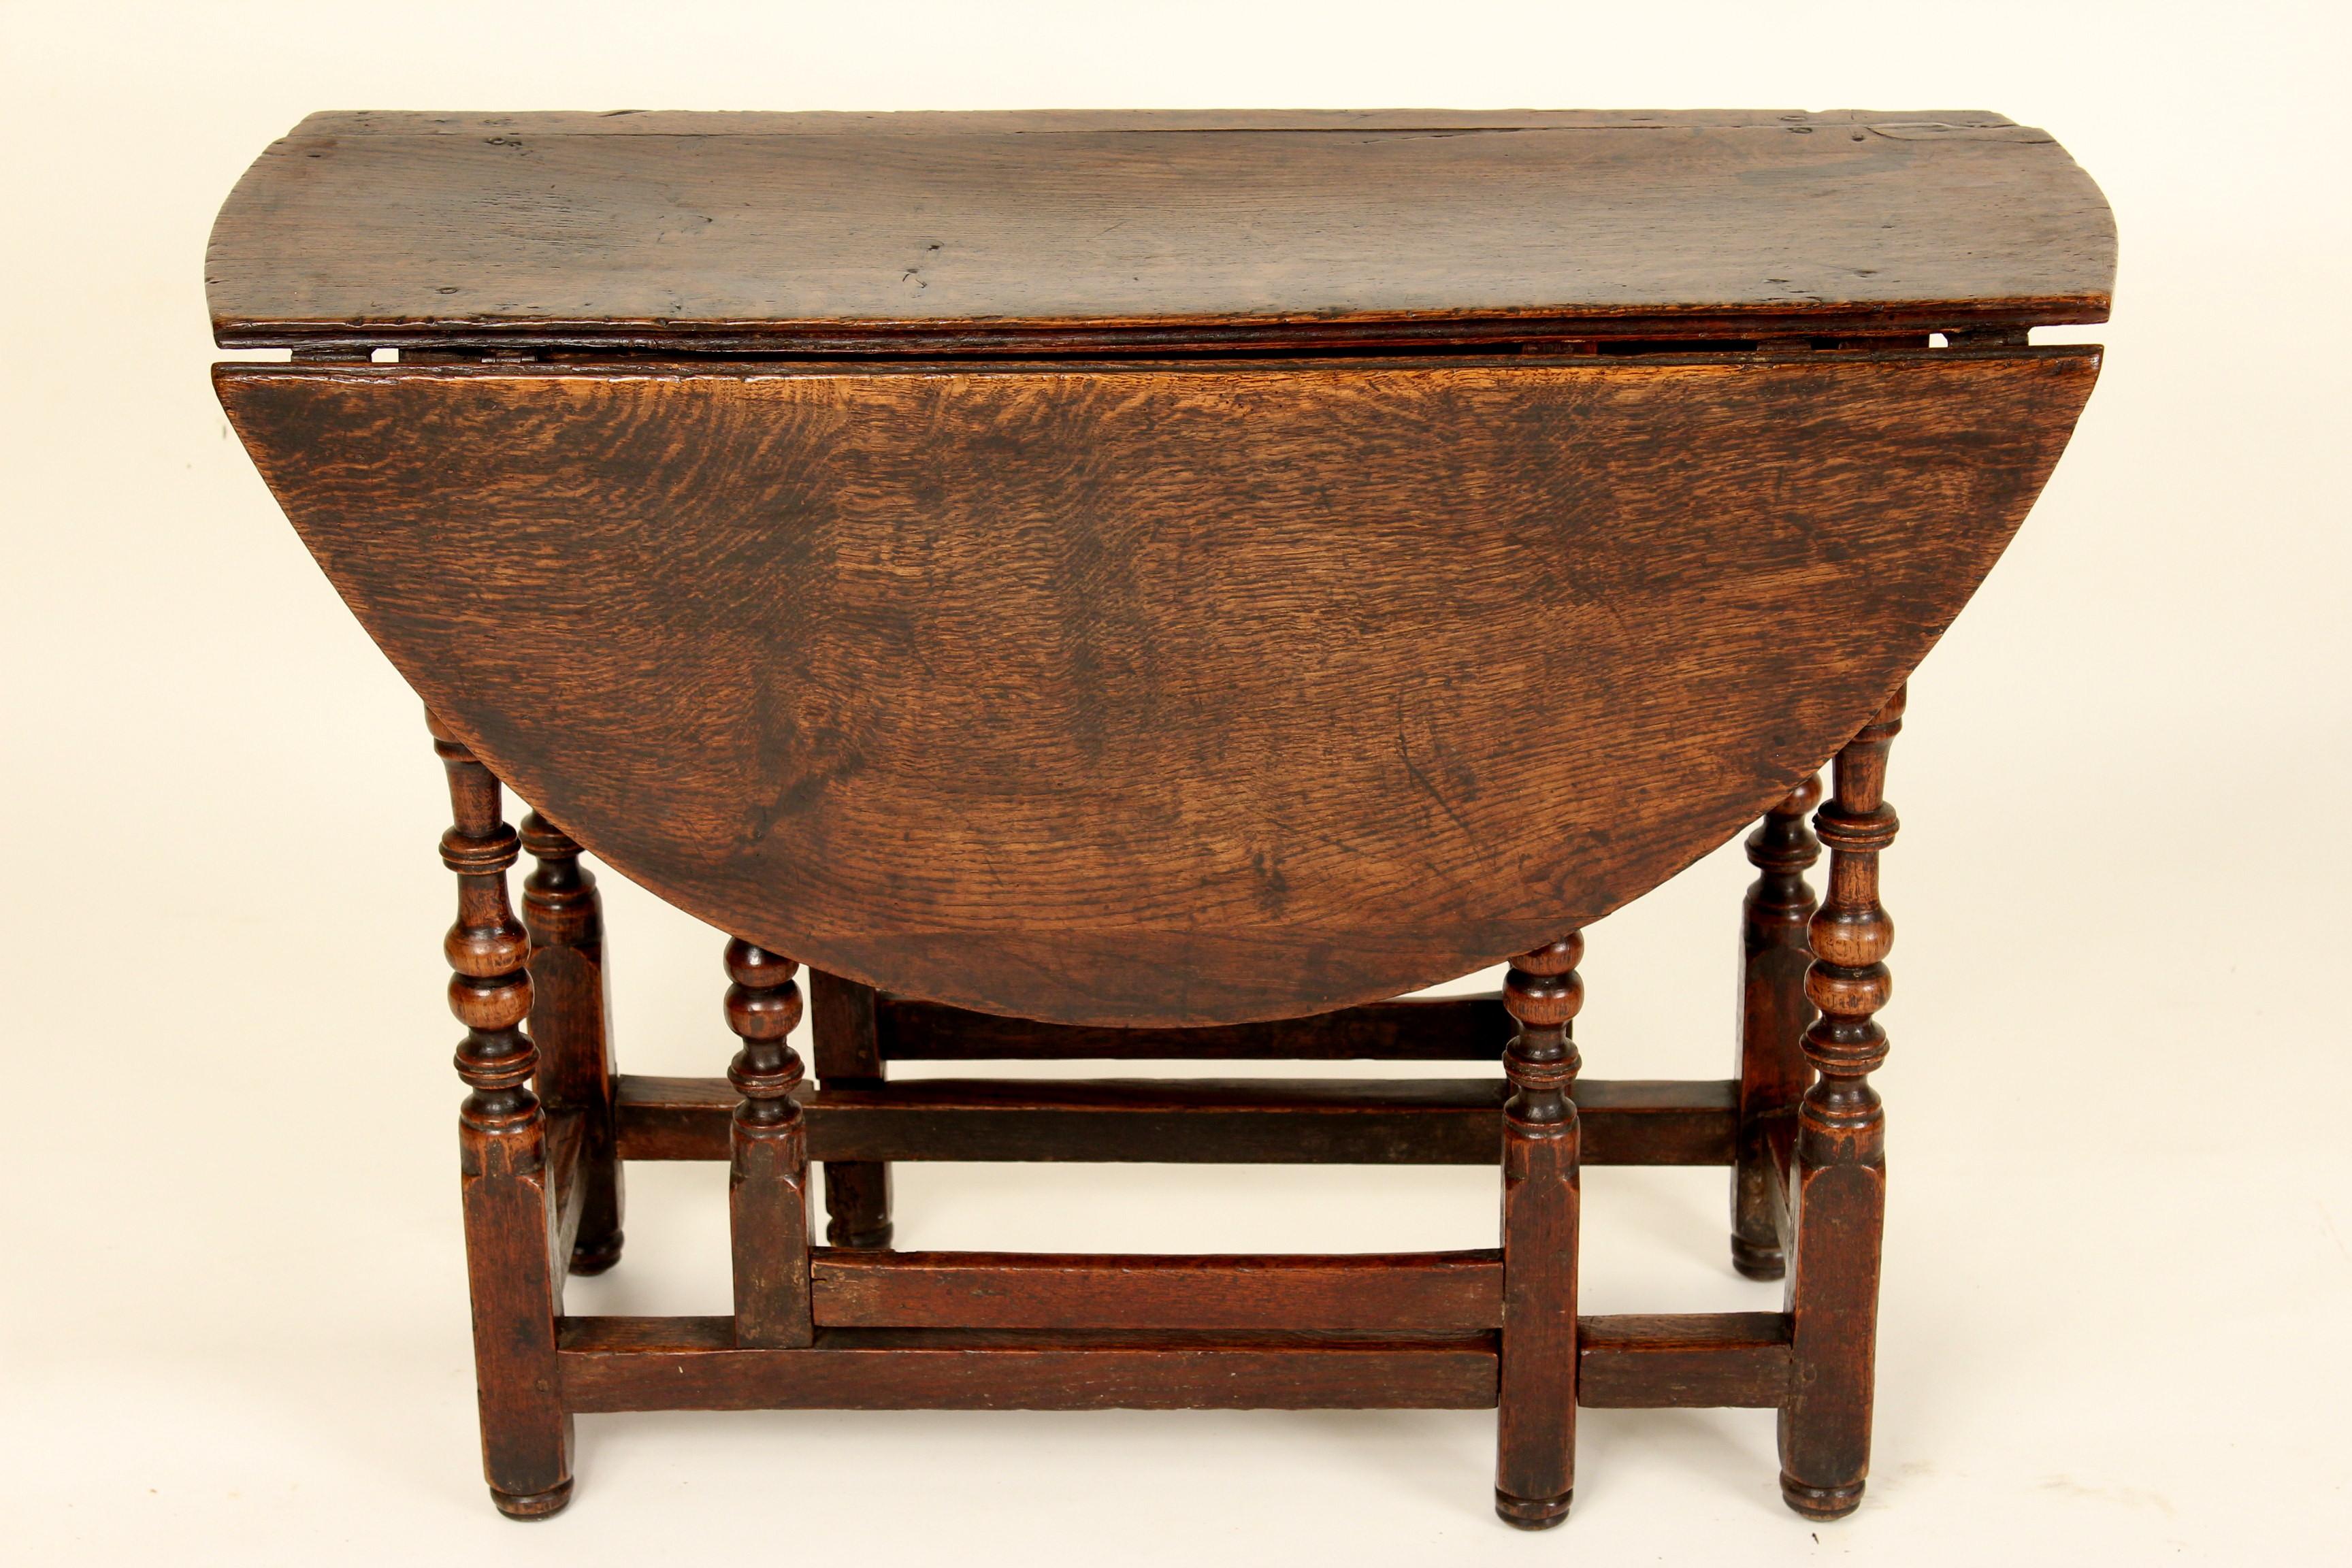 Antique English oak gate leg table, with nice old original patina, early 19th century. Dimensions when drop leafs are lowered, height 26.75